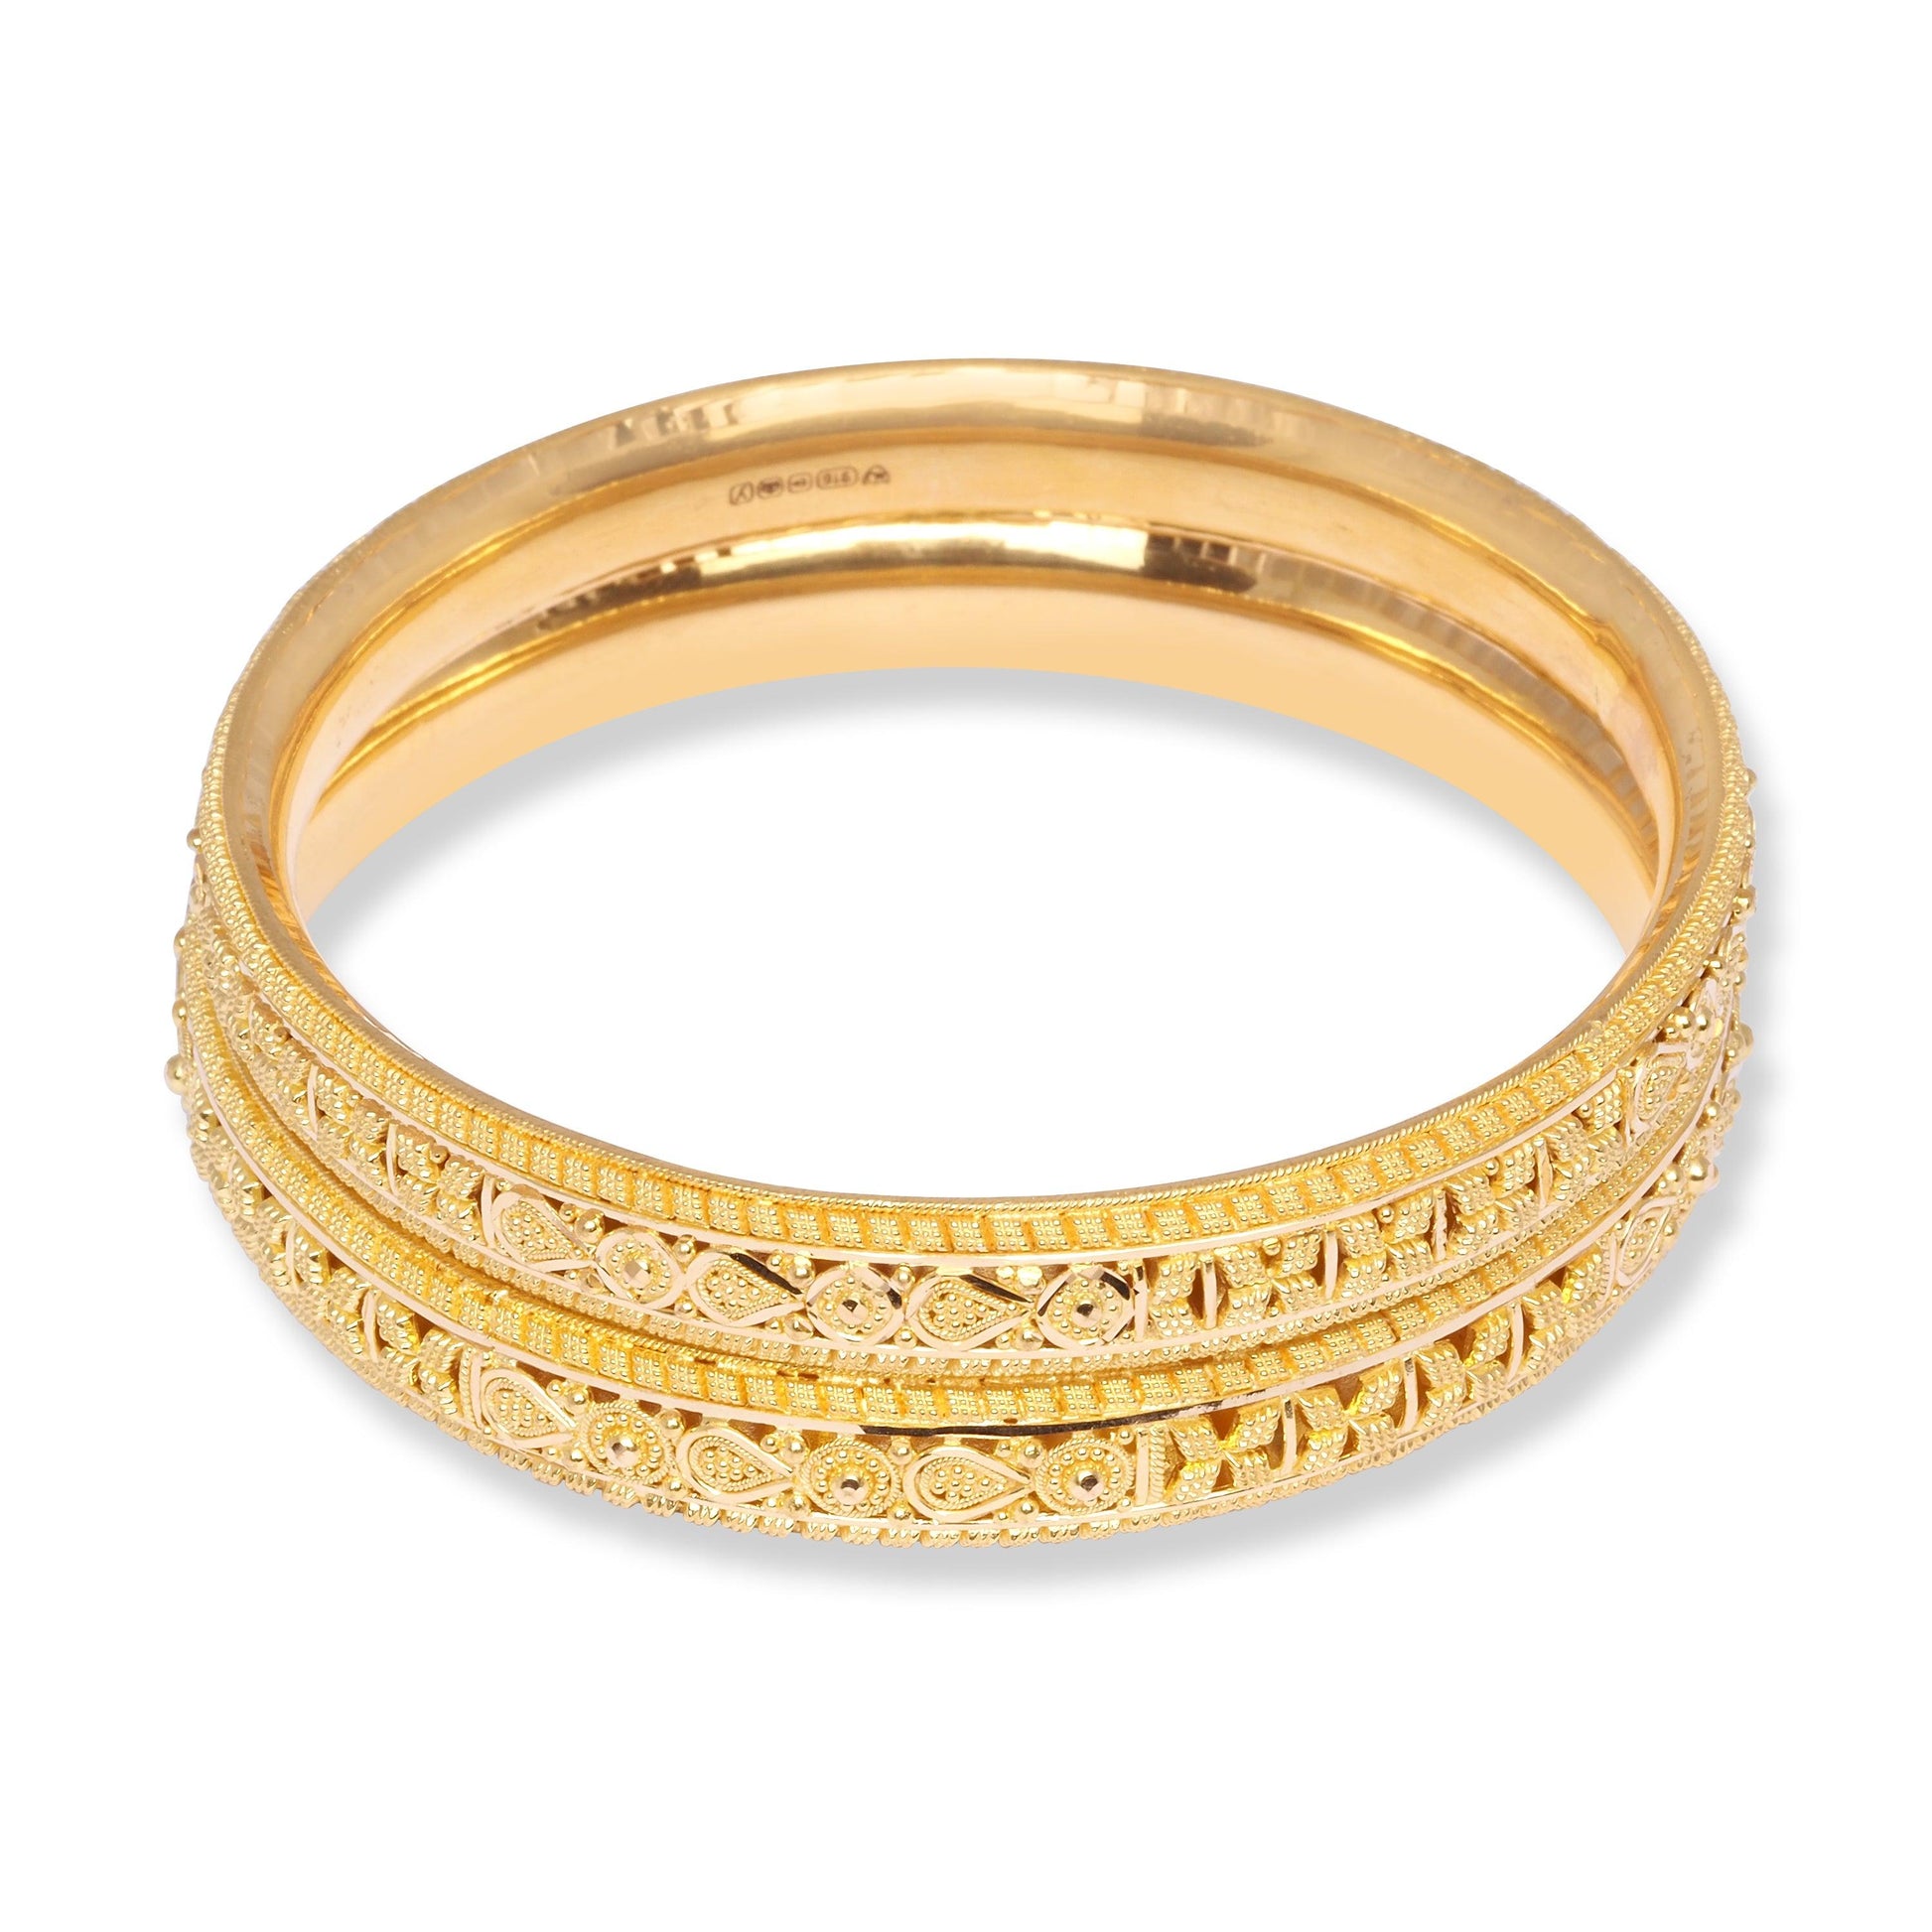 22ct Gold Pair of Bangles with Filigree Work & Comfort fit Finish B-8555 - Minar Jewellers